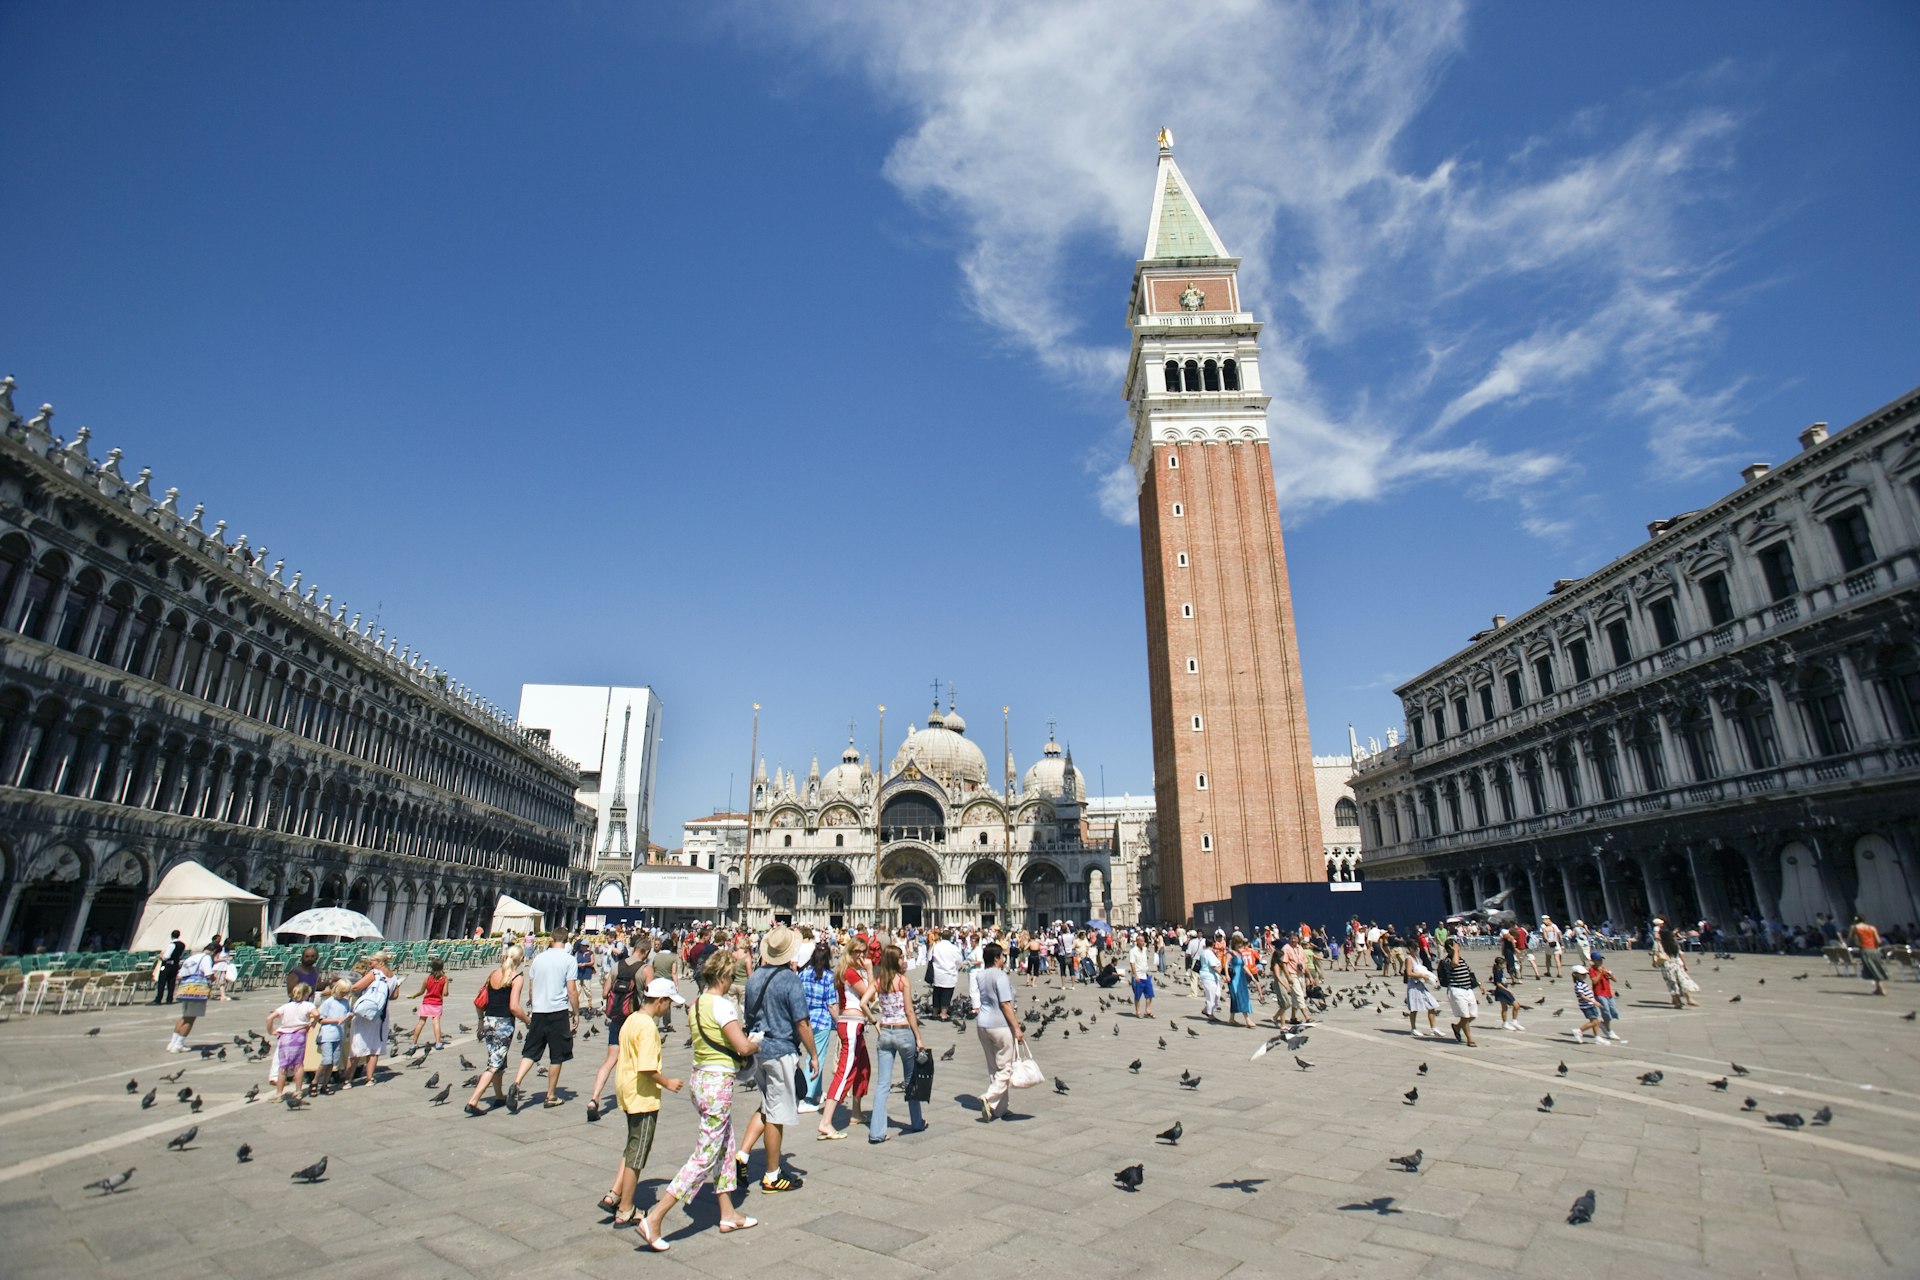 Piazza San Marco in Venice full of visitors with the Campanile Bell Tower dominating the view